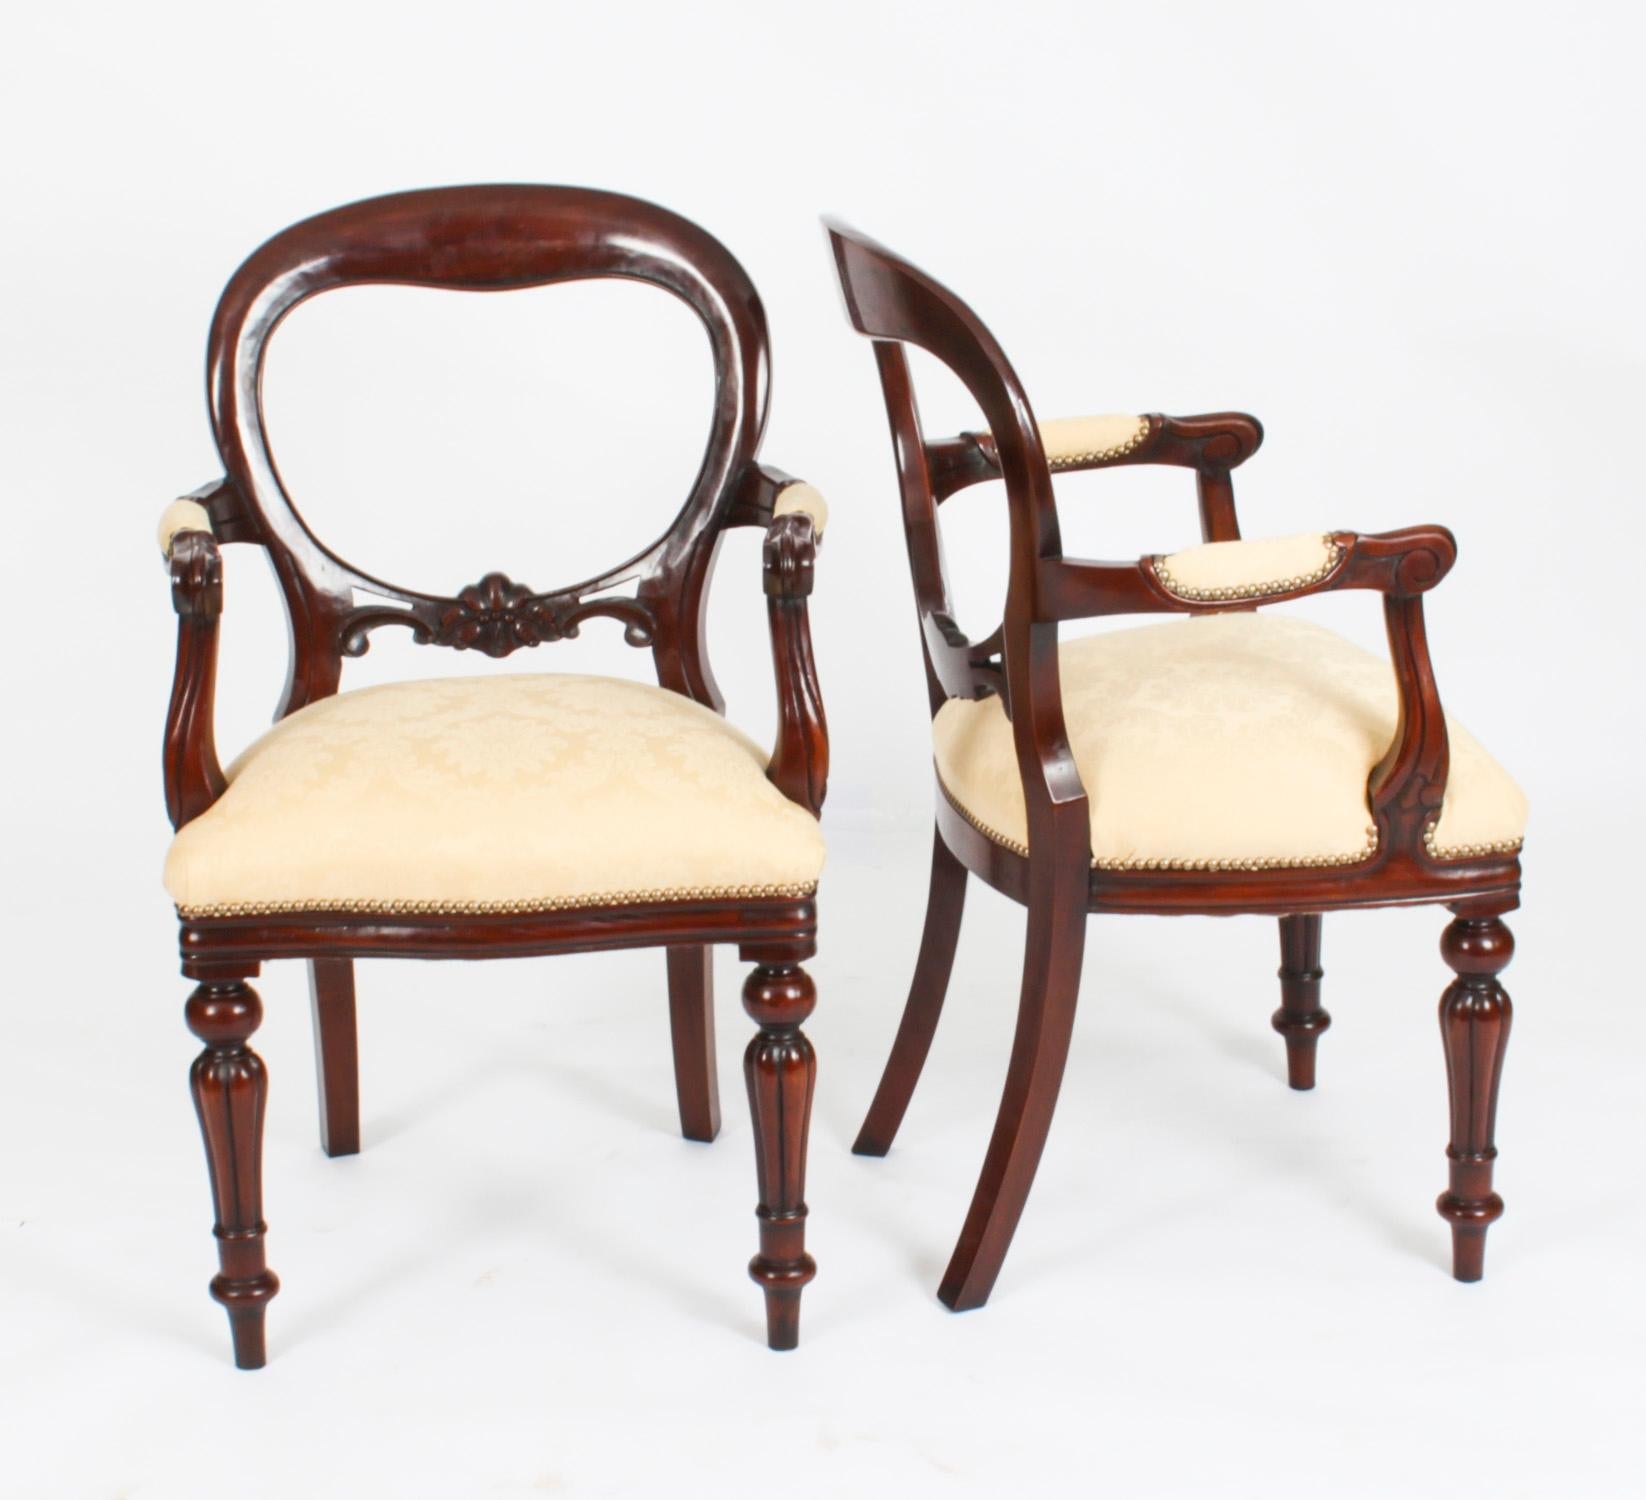 This is an absolutely fantastic vintage set of fourteen balloon back dining chairs, dating from second half of the 20th Century.

These chairs have been masterfully crafted in beautiful solid mahogany throughout and the finish and attention to